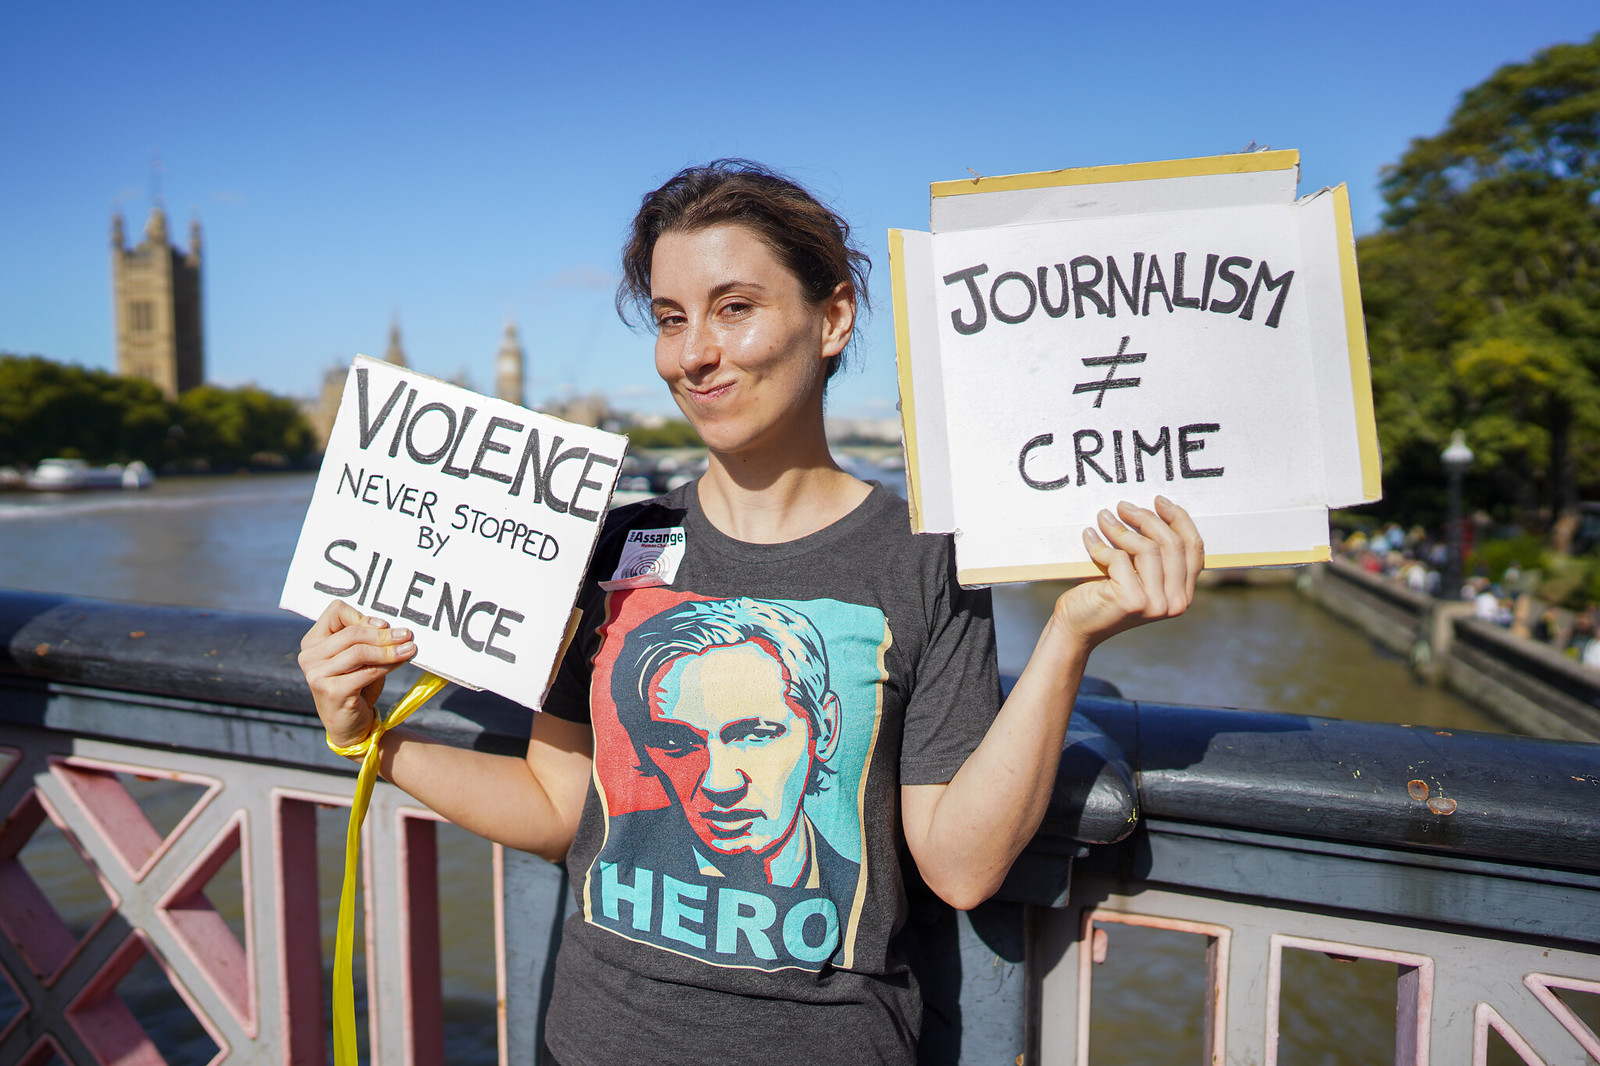 Julian-Assange-Hero-Violence-Never-Stopped-by-Silence-Oct-11-2022-Photo-by-Alisdare-Hickson